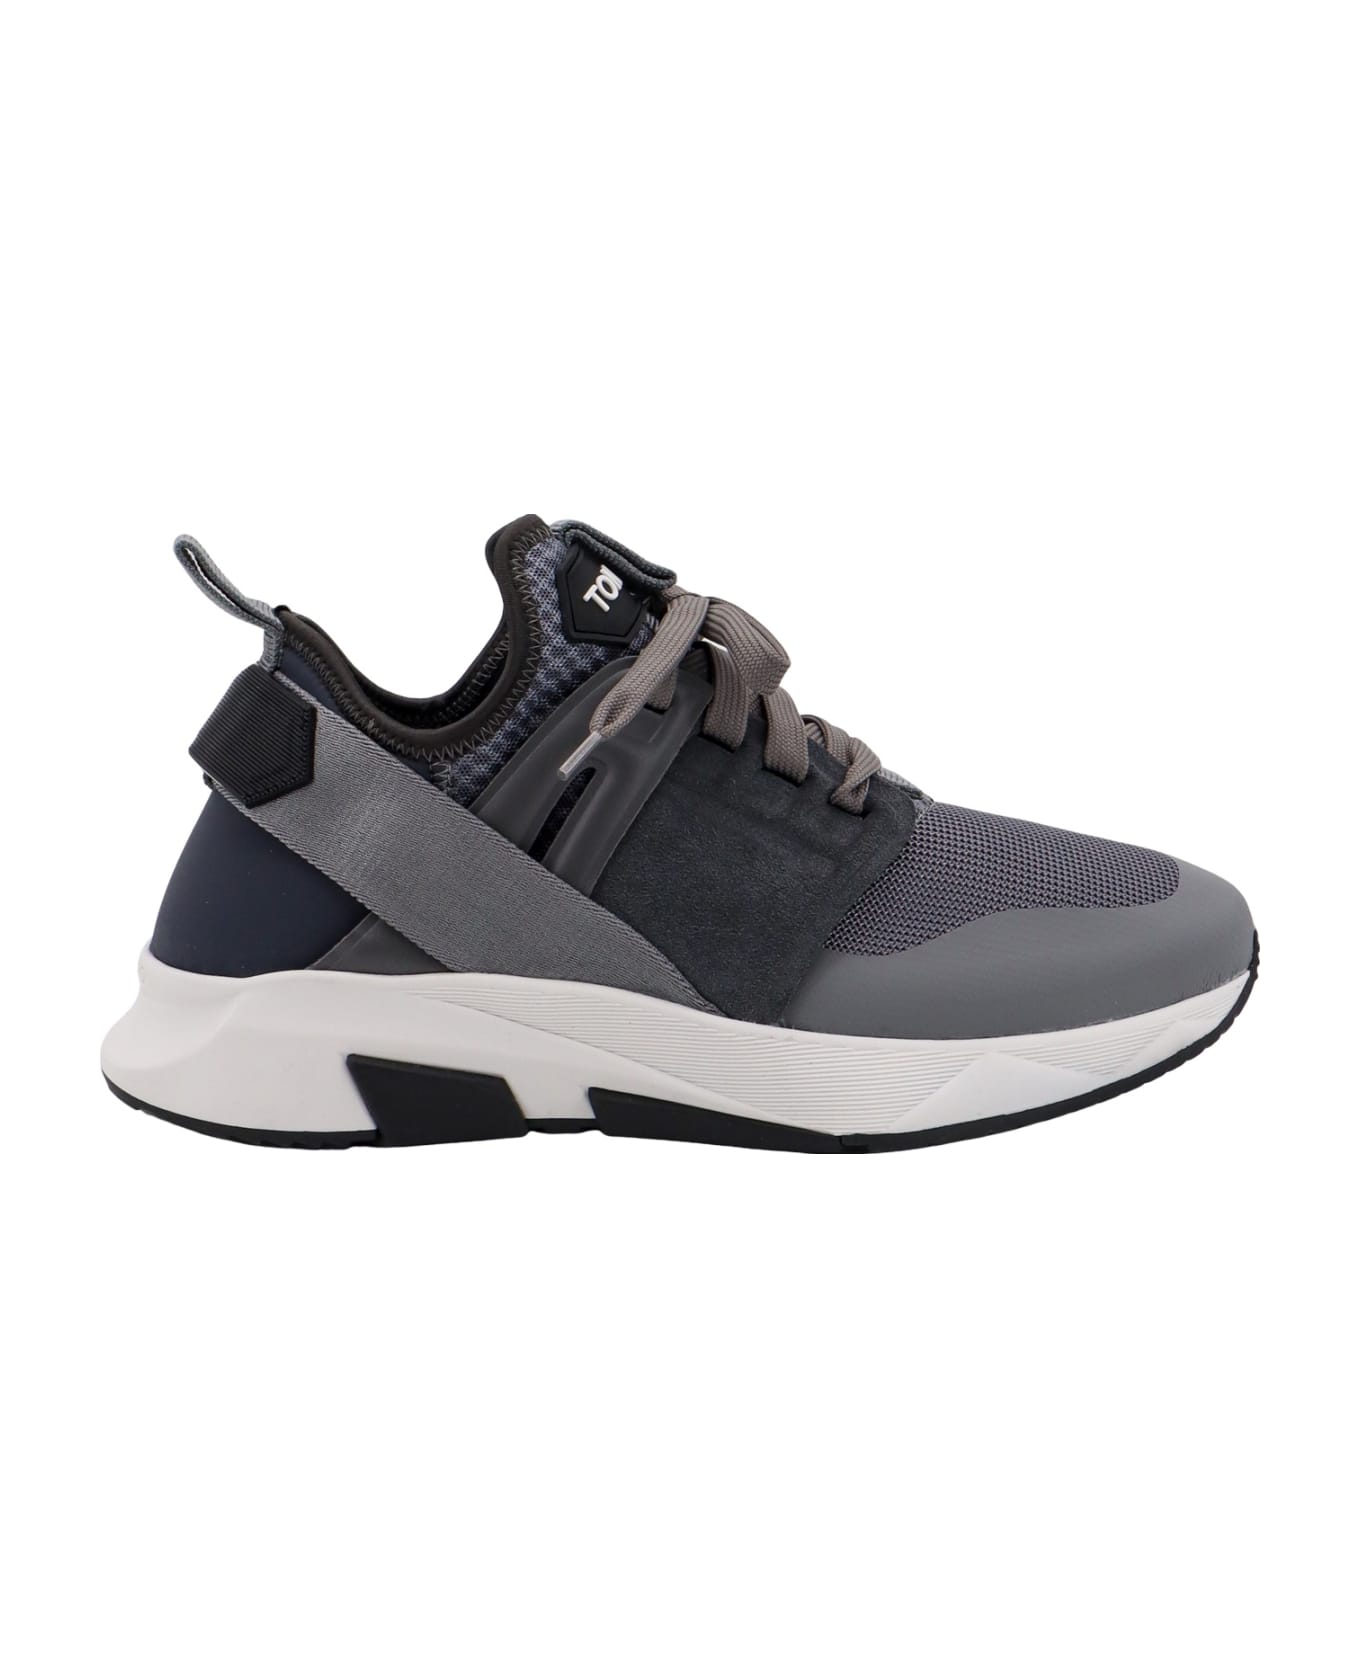 Tom Ford Jago Sneakers - Grey スニーカー